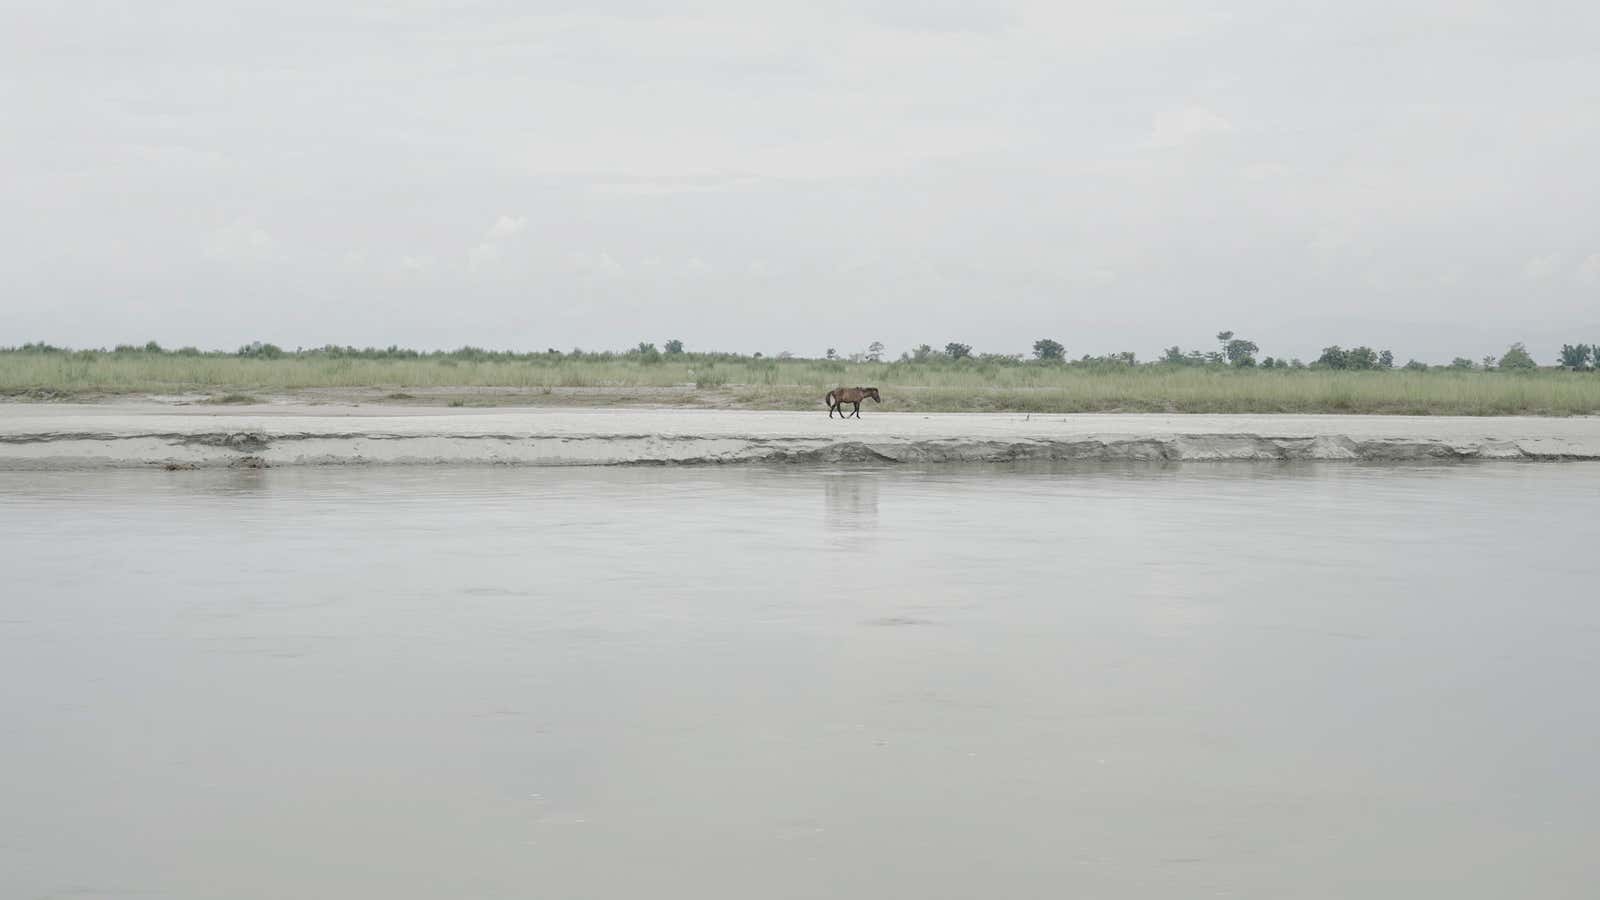 A horse walks along the shore of a sapori in upper Assam. Inhabitants of these riverine islands often rear animals to supplement their income. Most raise cows and goats, but there are some horses too.